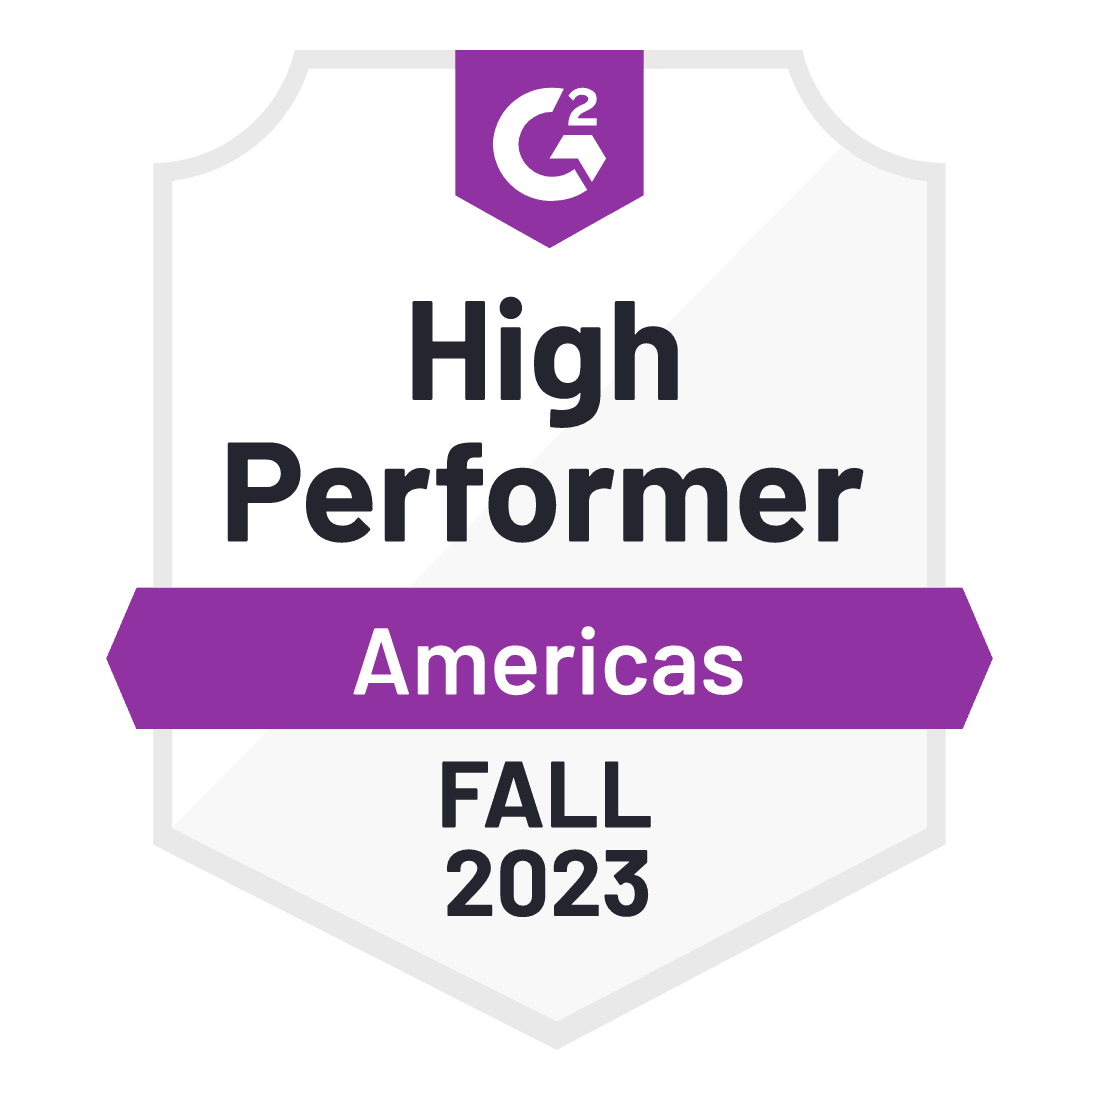 G2 - Contract Management - High Performer - Fall 2023